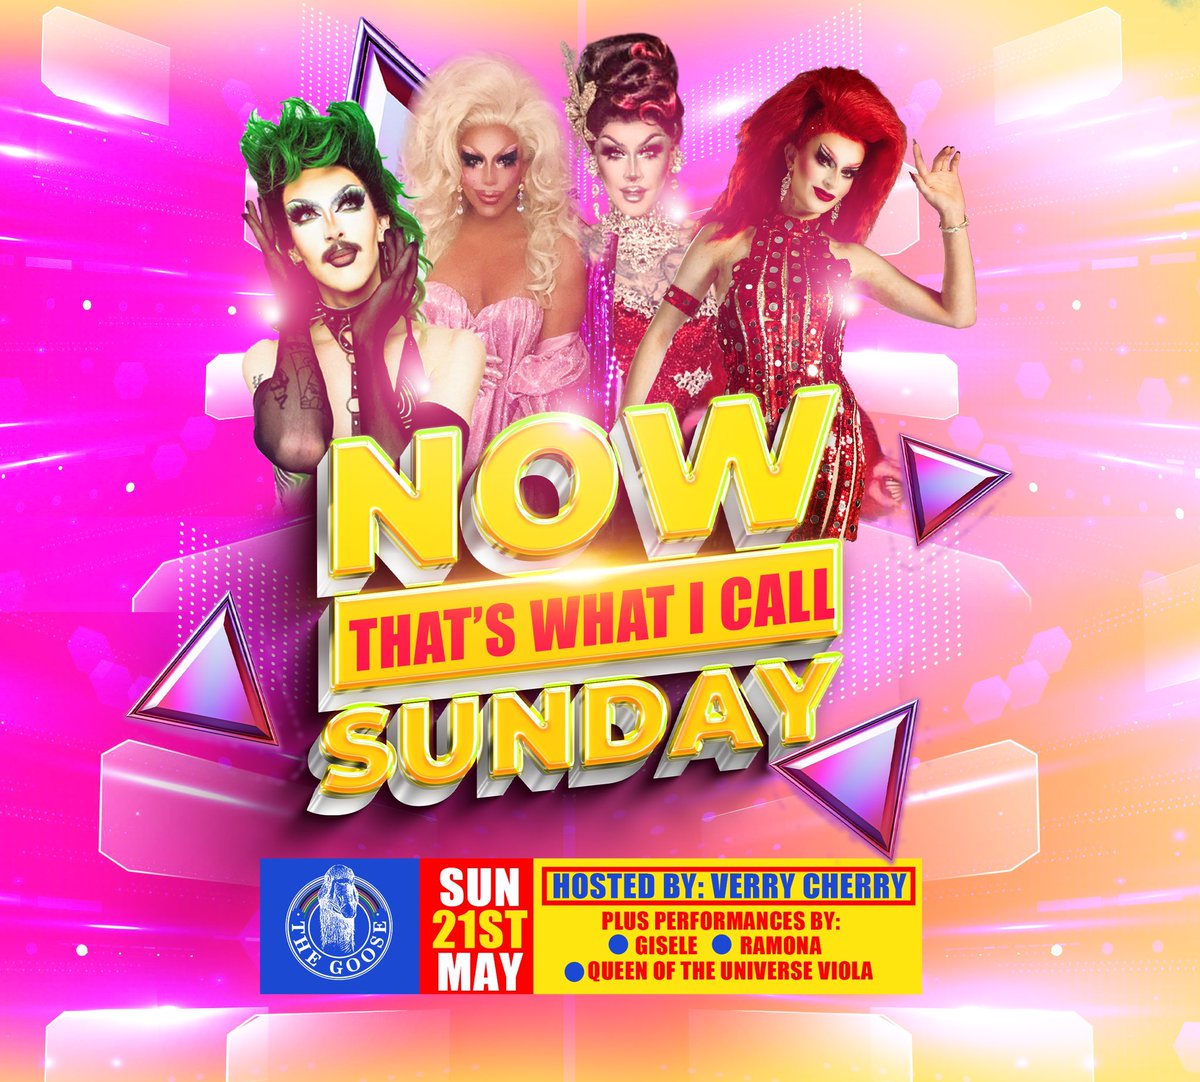 NOW THATS WHAT I CALL SUNDAY…

Tomorrow our Sunday show returns

Verry Cherry
Gisele
Ramona 
And Queens of the universe Viola 

8pm show time 

#thegoose #bloomstreet #mamchester #gayvillagemanchester #sunday #sundayshow